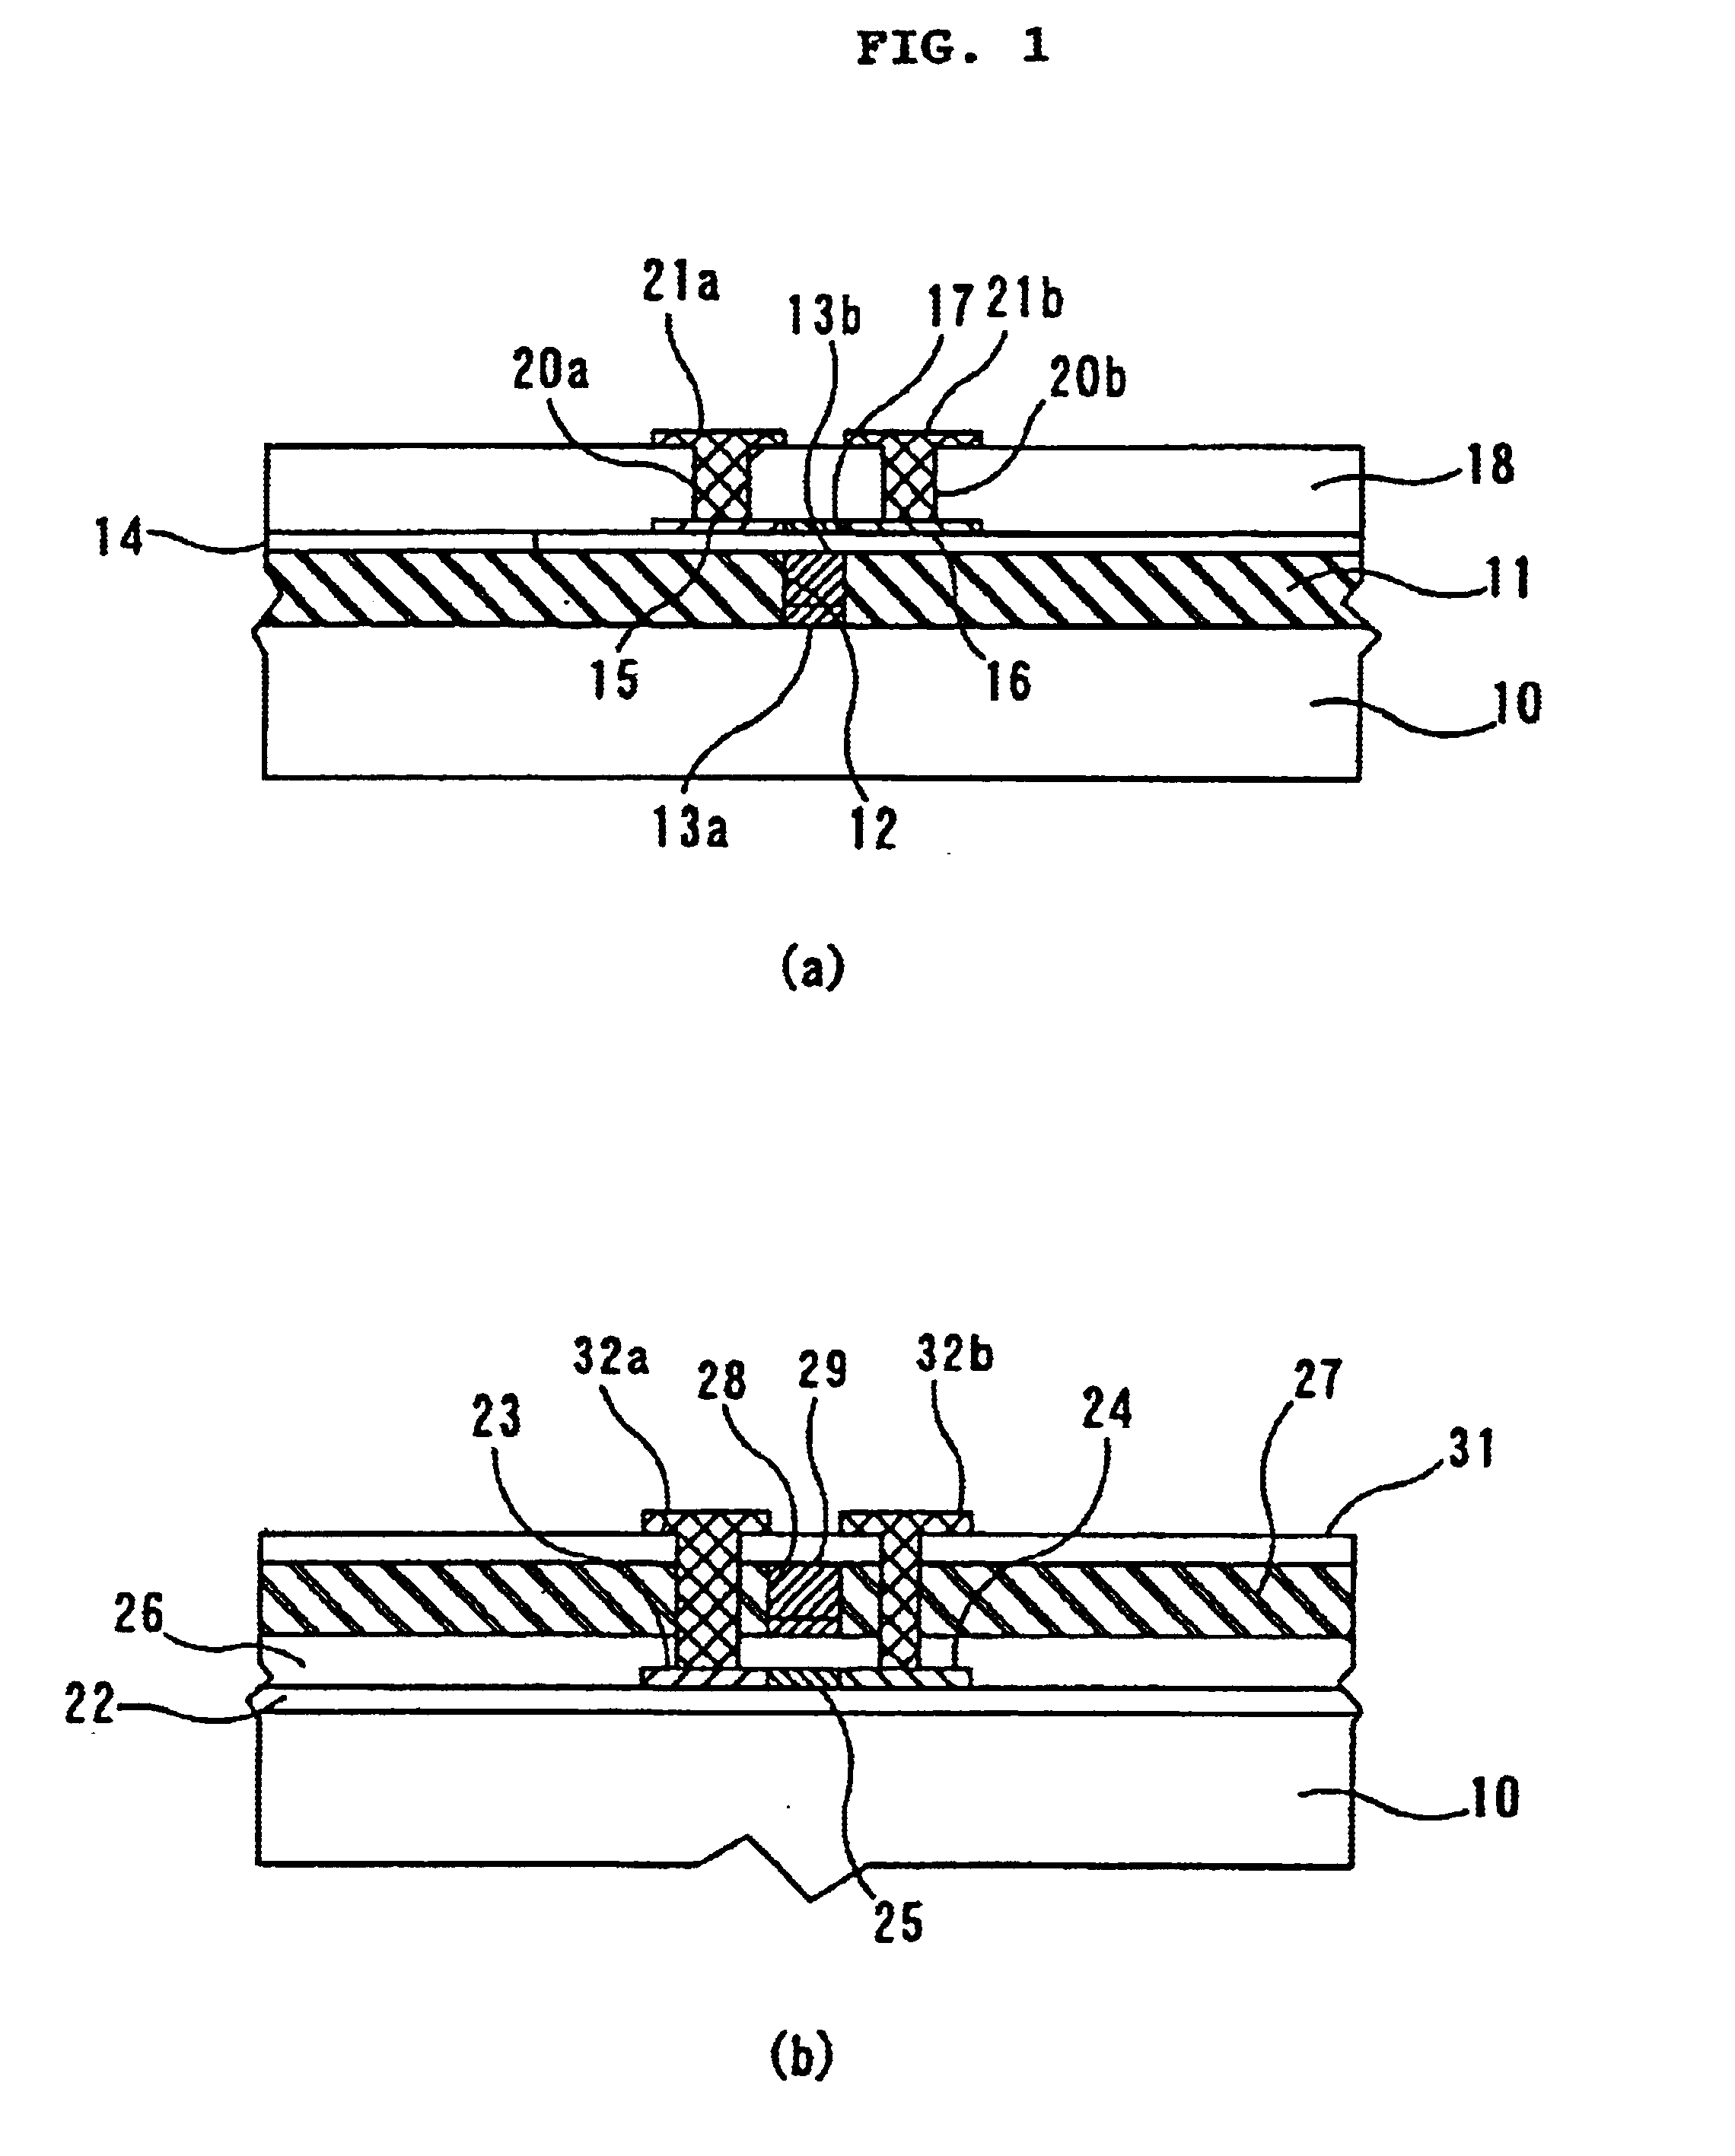 Thin-film transistor structure, method for manufacturing the thin-film transistor structure, and display device using the thin-film transistor structure